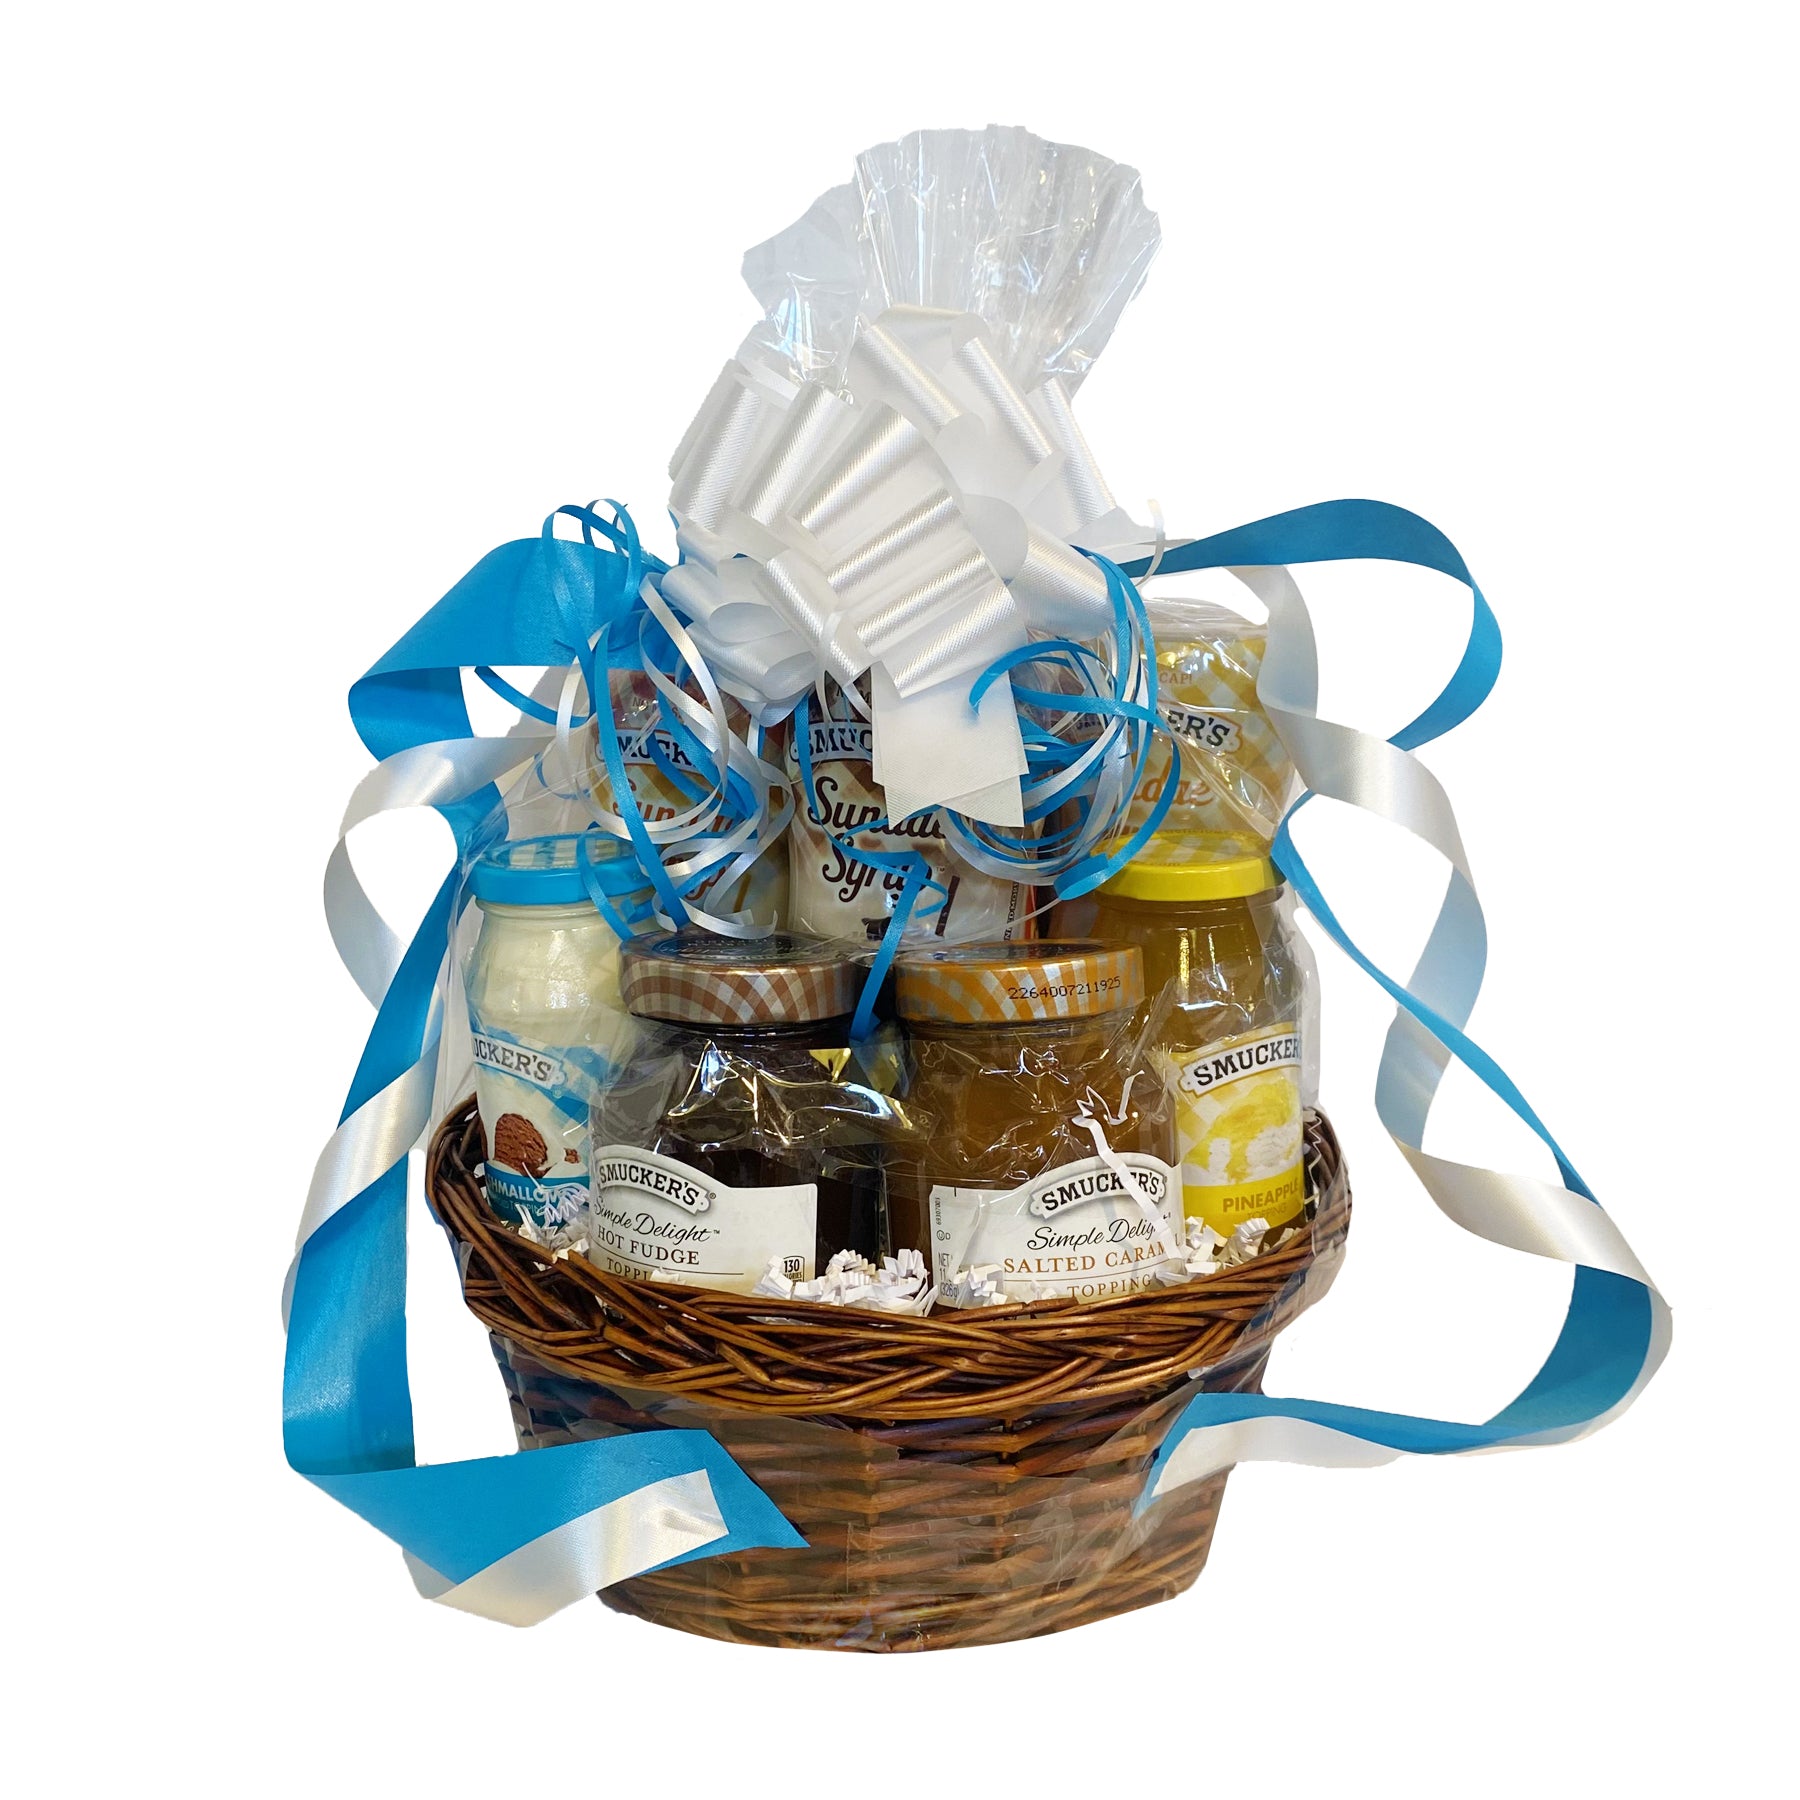 Top It Off Ice Cream Topping Gift Basket